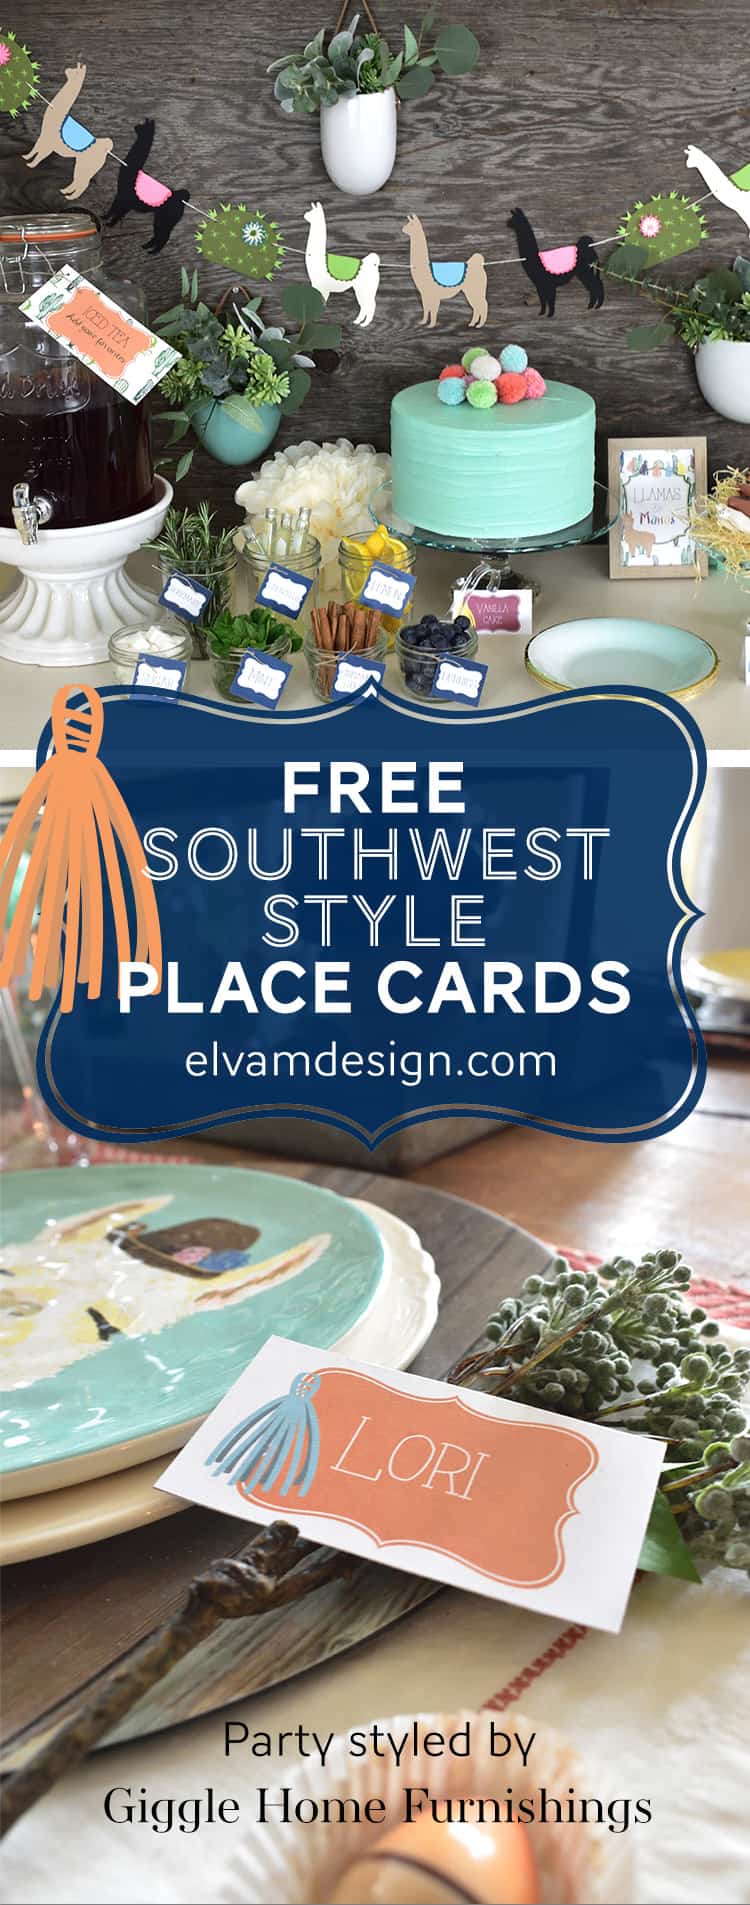 Free Southwest Style Place Cards from Elva M Design Studio.